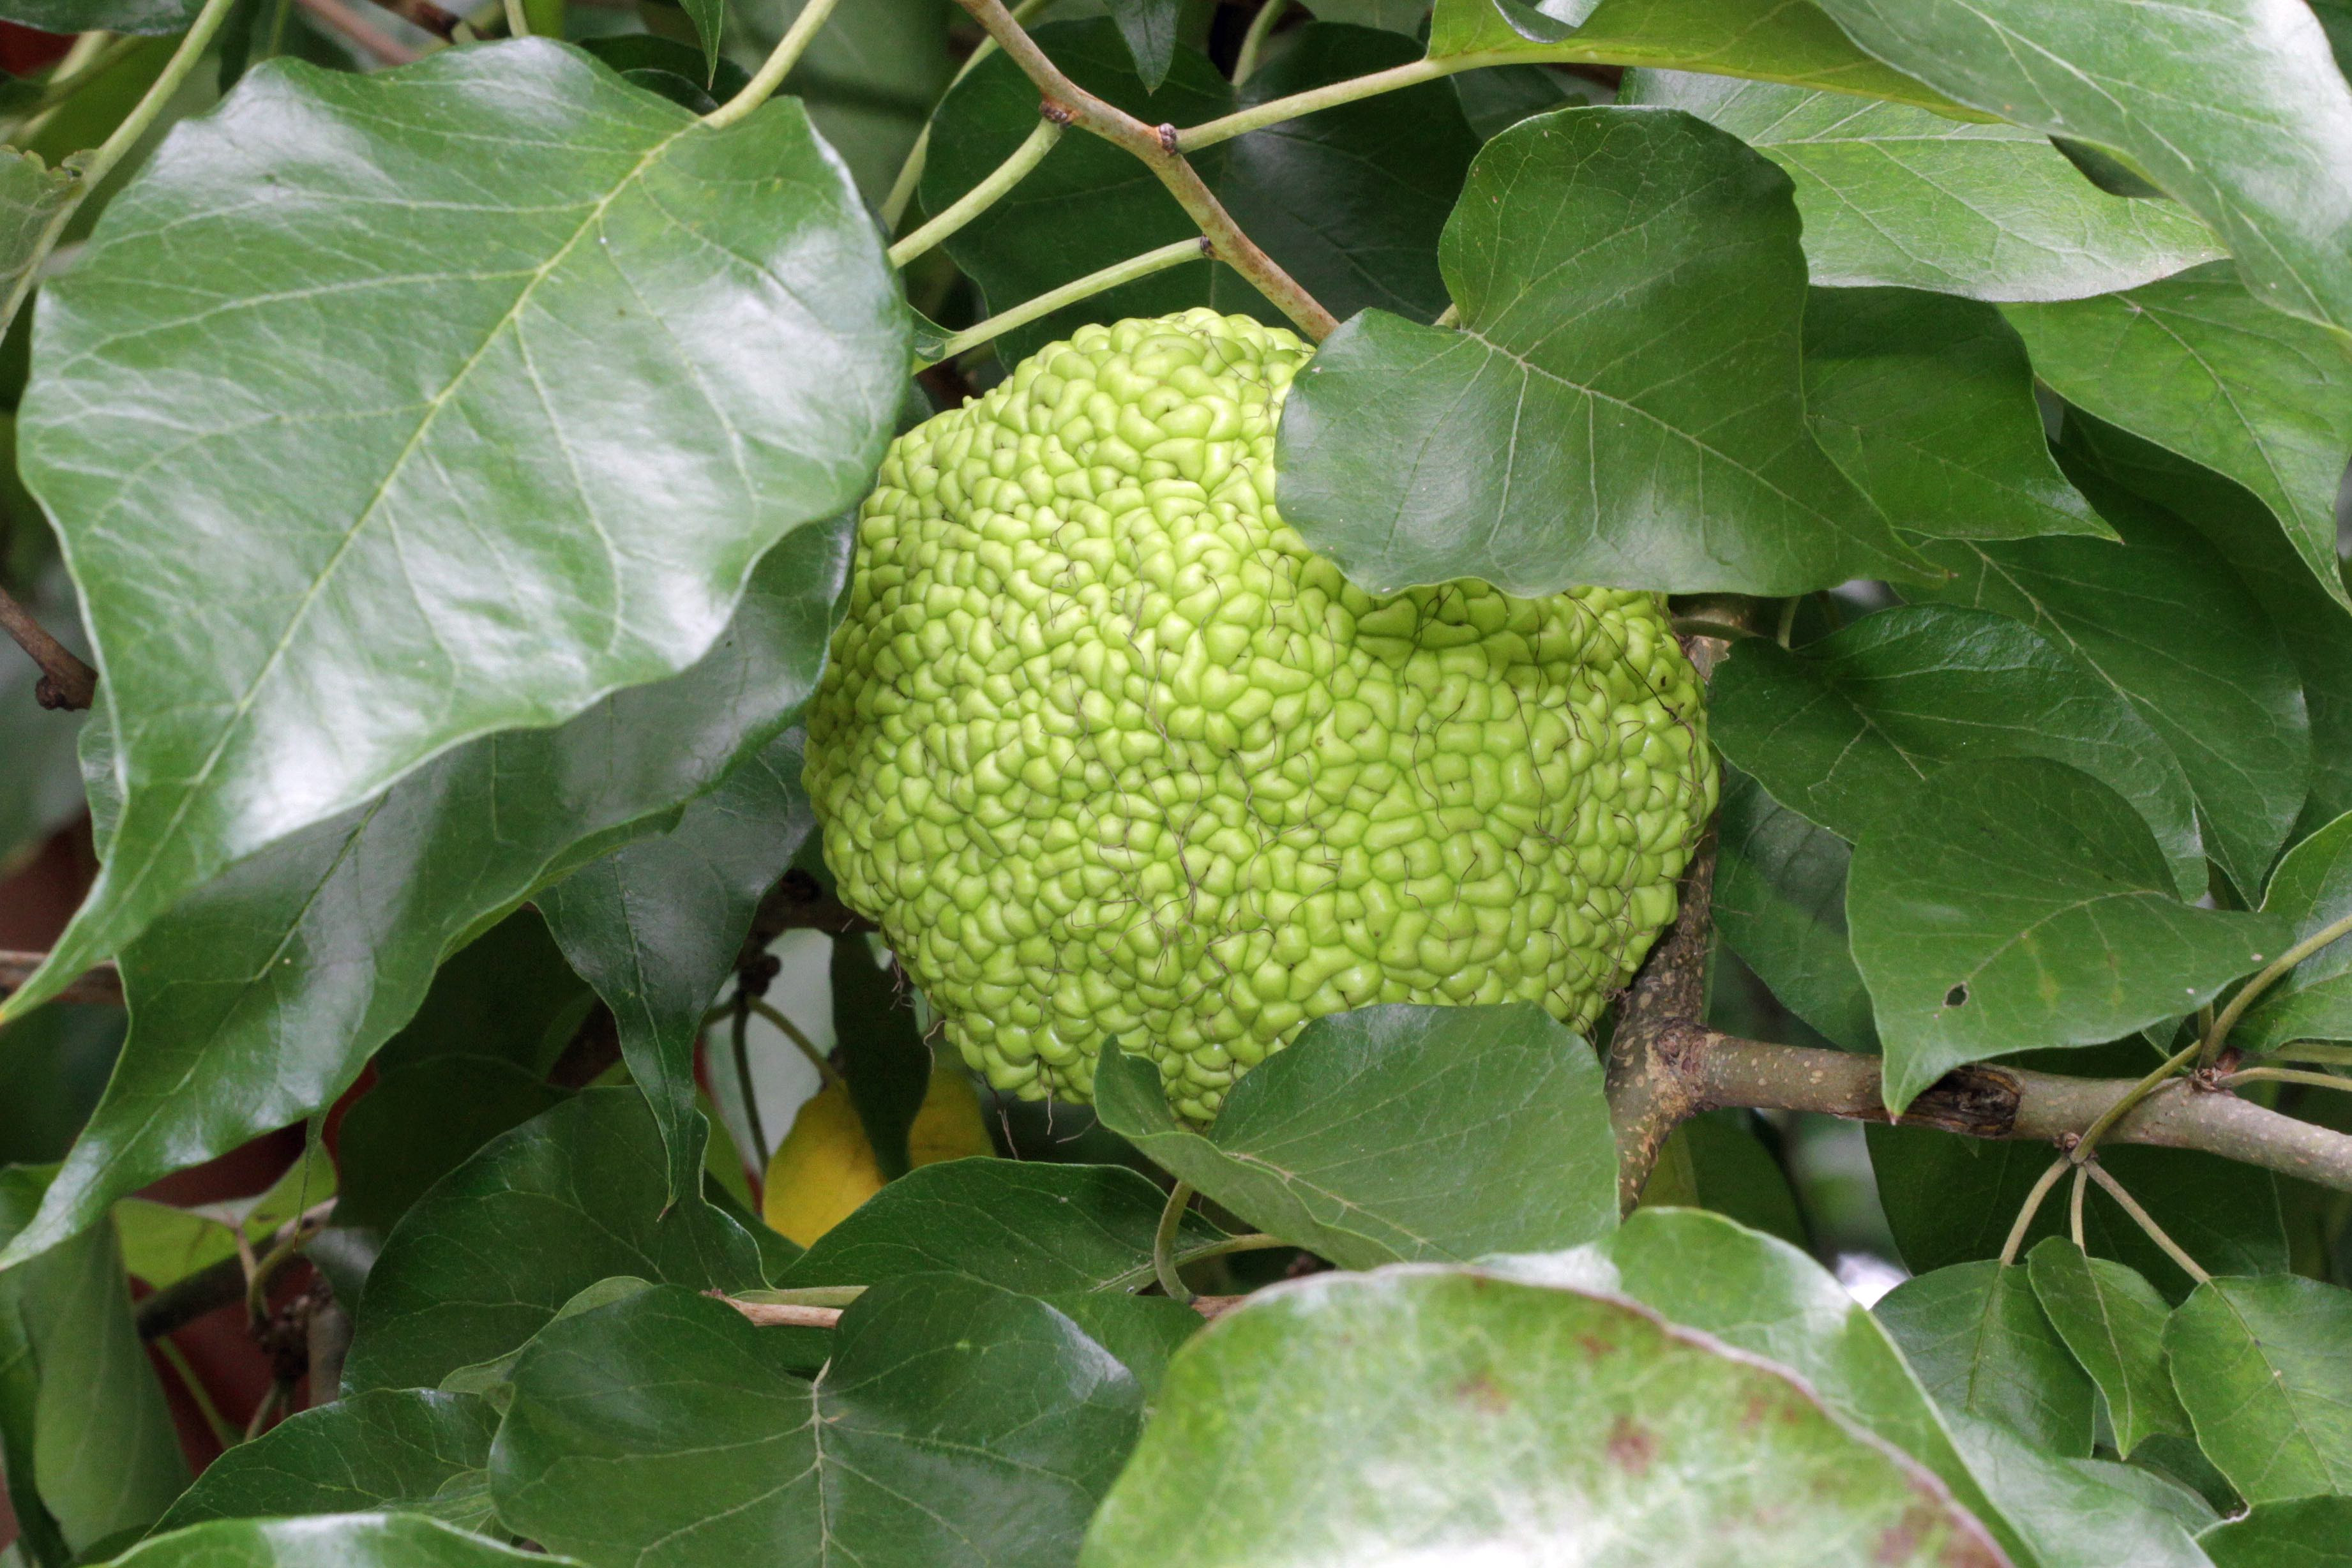 The Scientific Name is Maclura pomifera [=Toxylon pomiferum]. You will likely hear them called Osage-orange, Hedge-Apple, Bowwood. This picture shows the Large, glossy leaves with acuminate tips surrounding the unmistakable large fruit of Osage Orange. of Maclura pomifera [=Toxylon pomiferum]